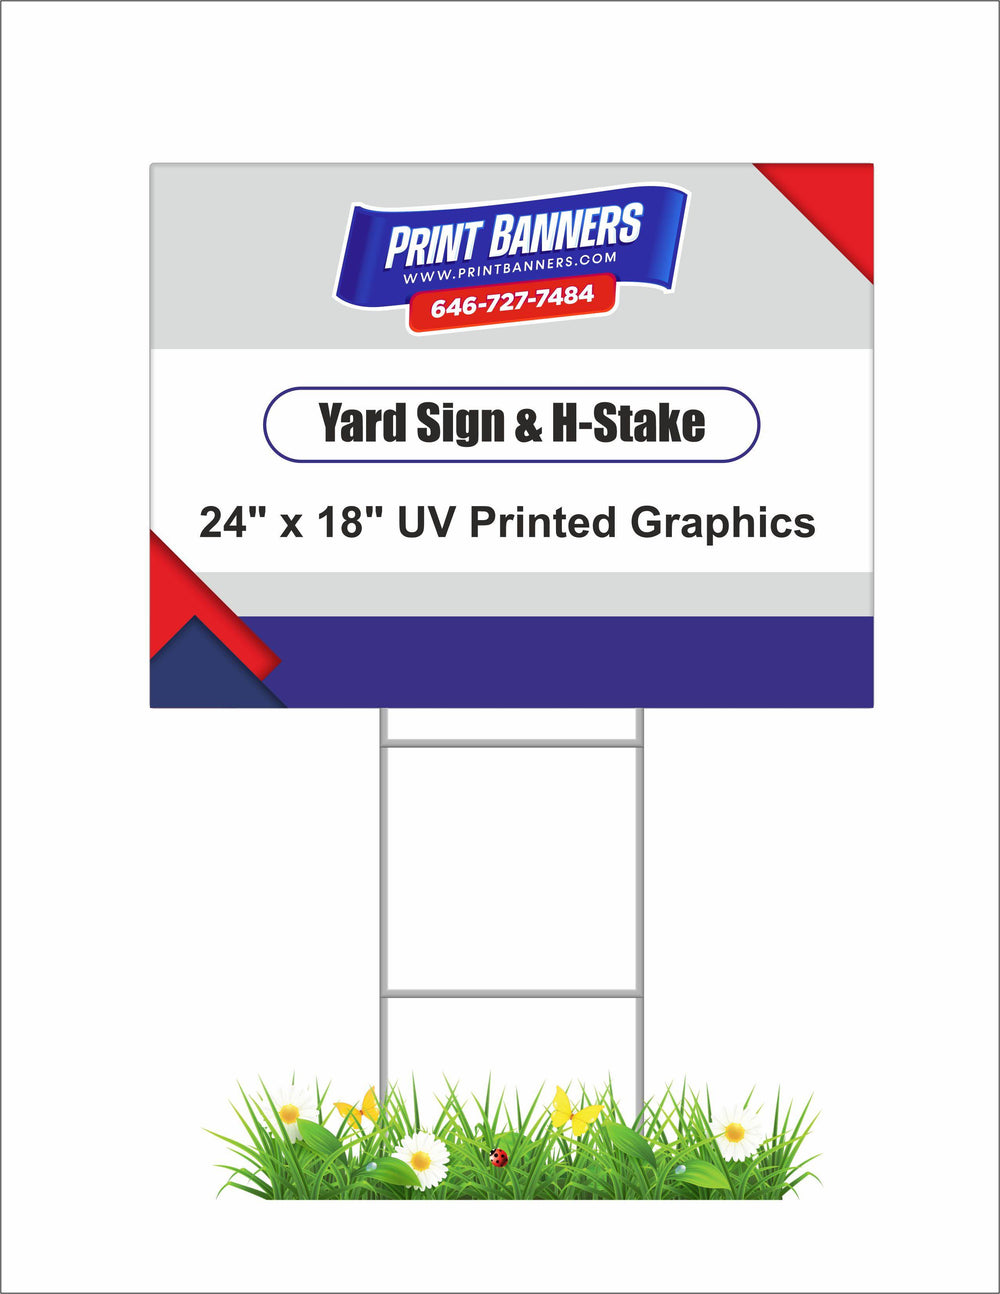 Yard Sign and H-Stake - Print Banners NYC